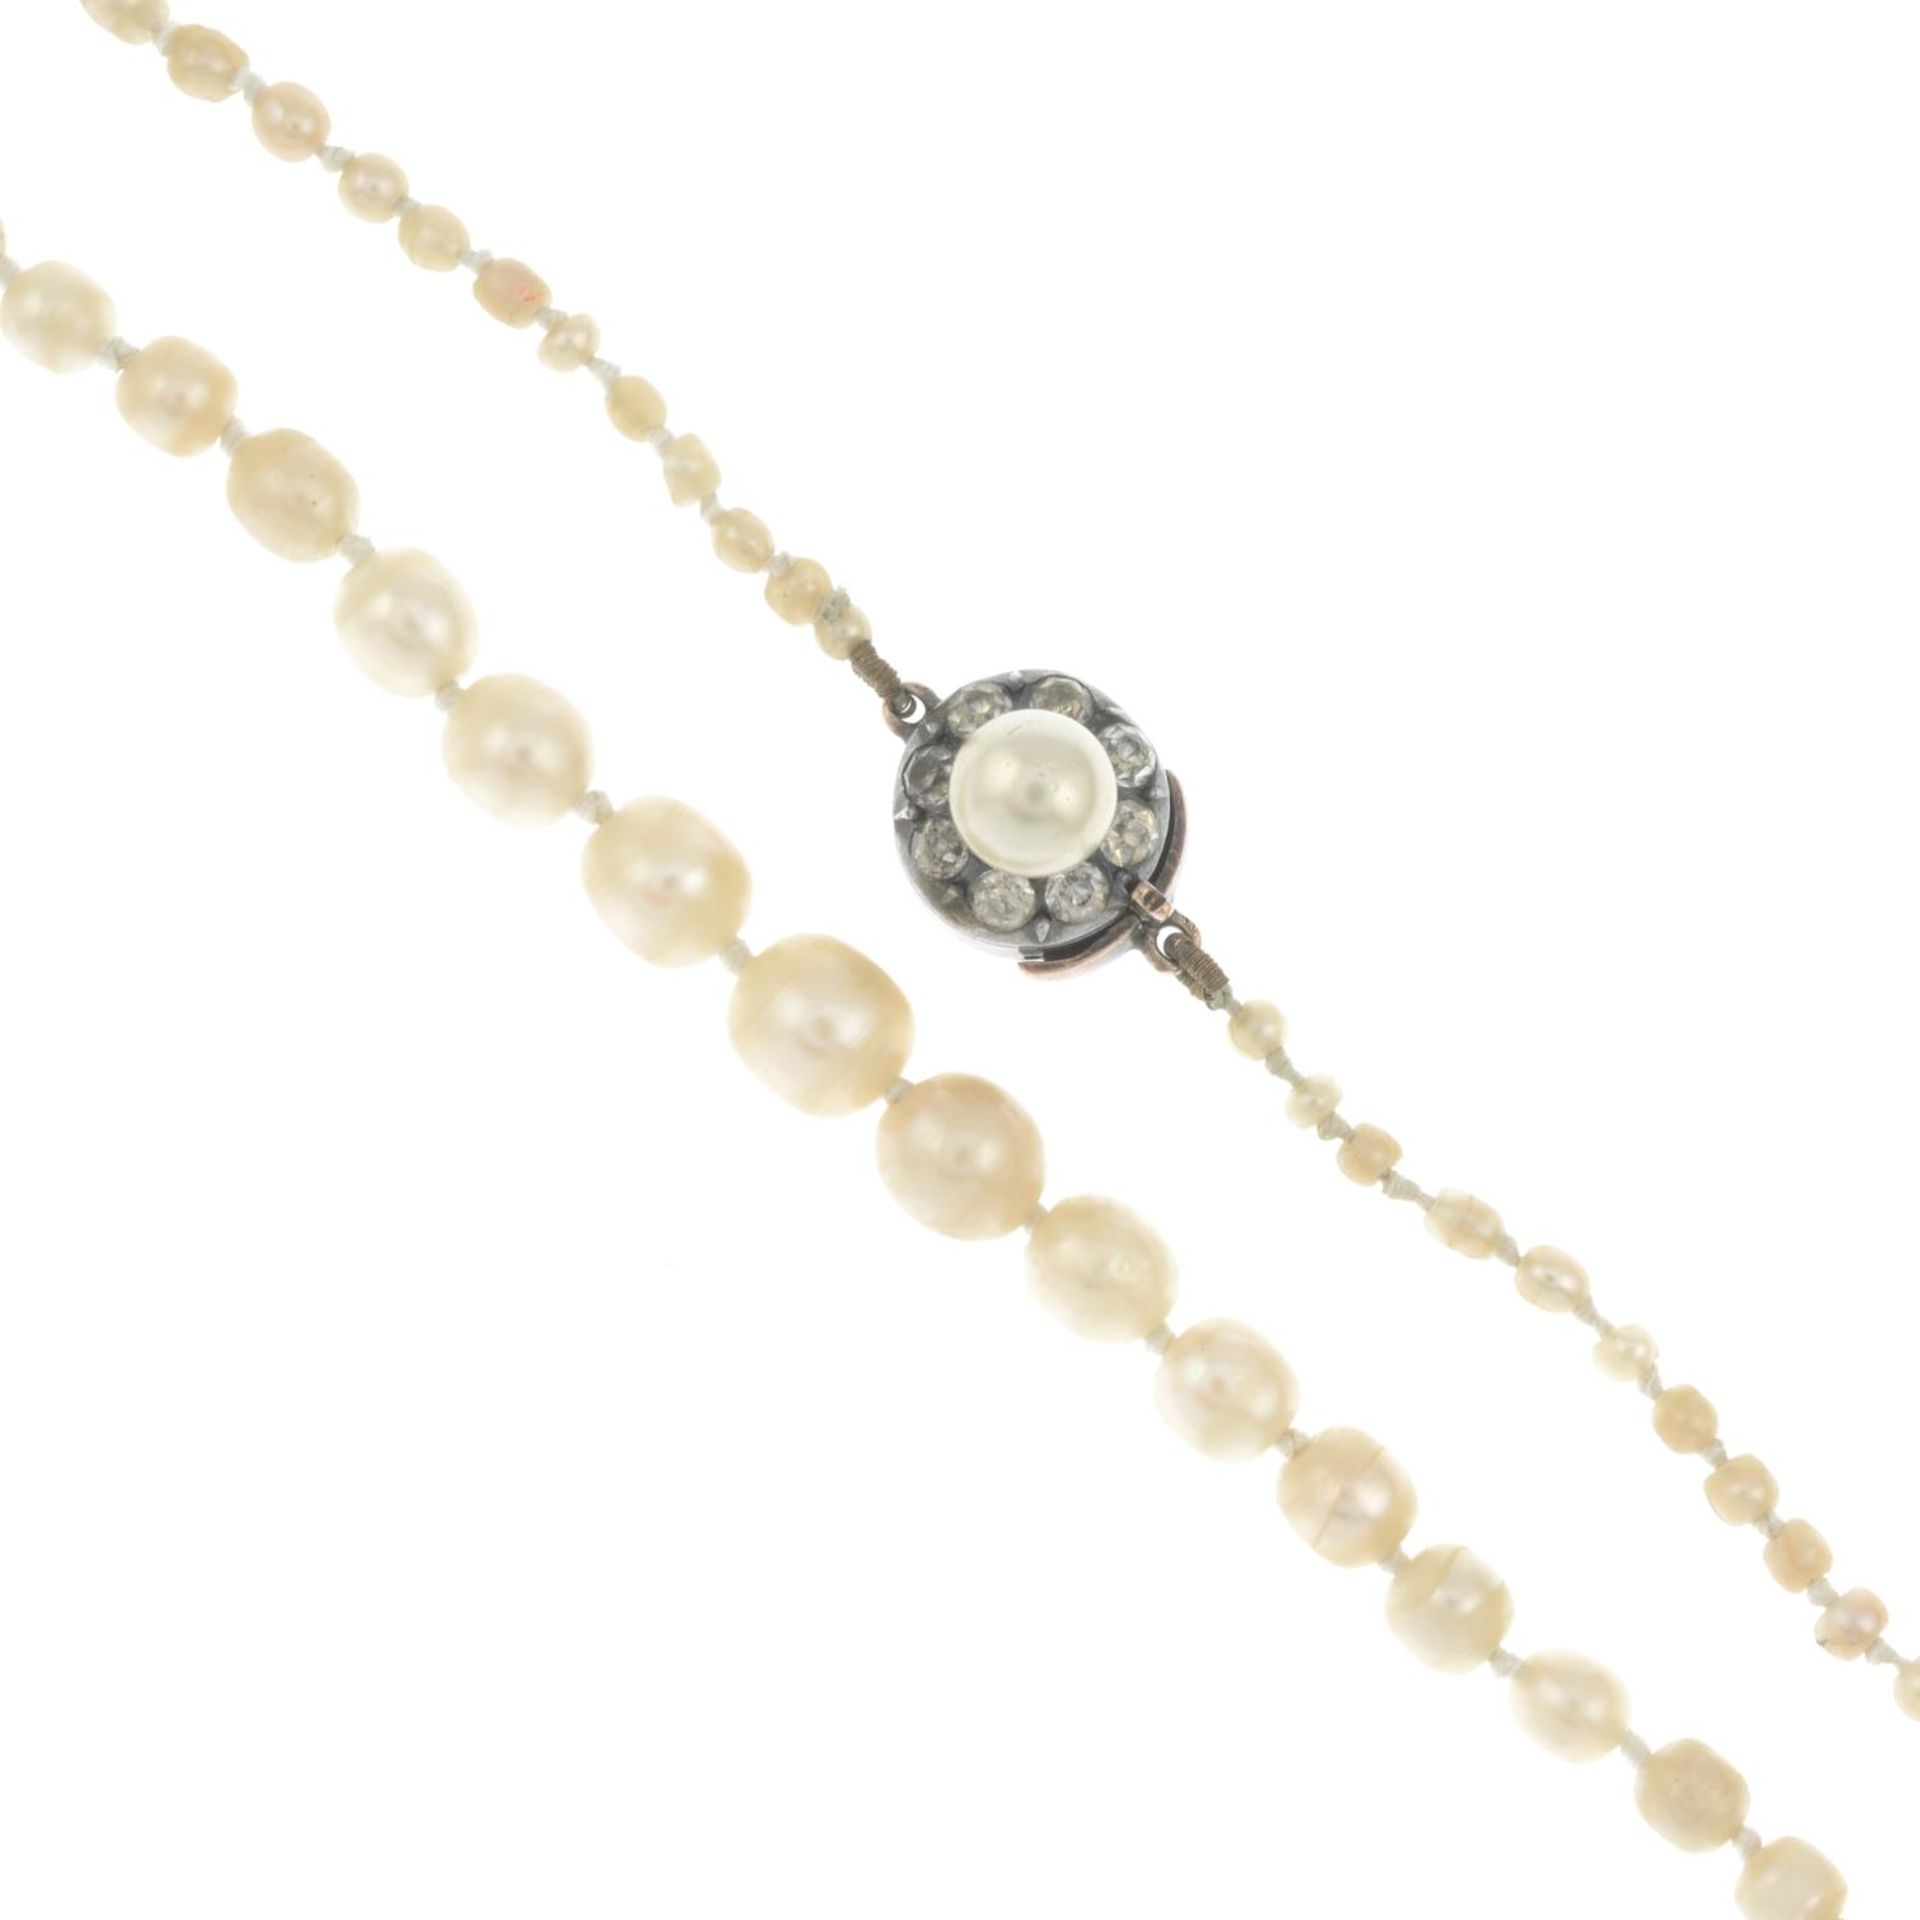 A graduated natural saltwater and freshwater pearl necklace,